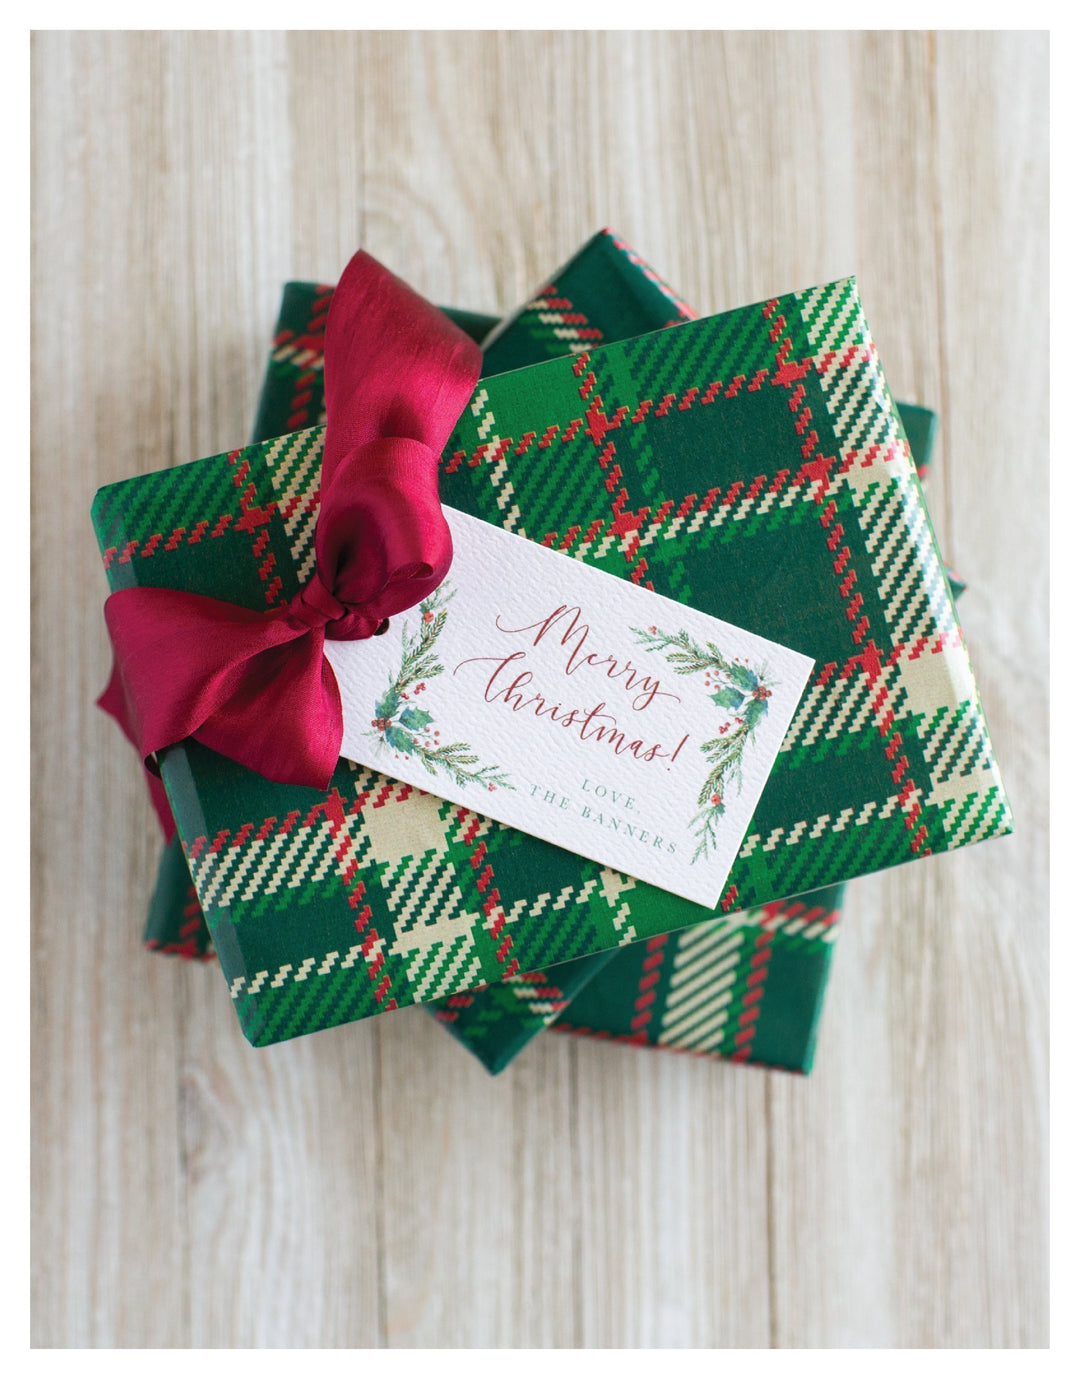 The Tanner Family Christmas Gift Tag